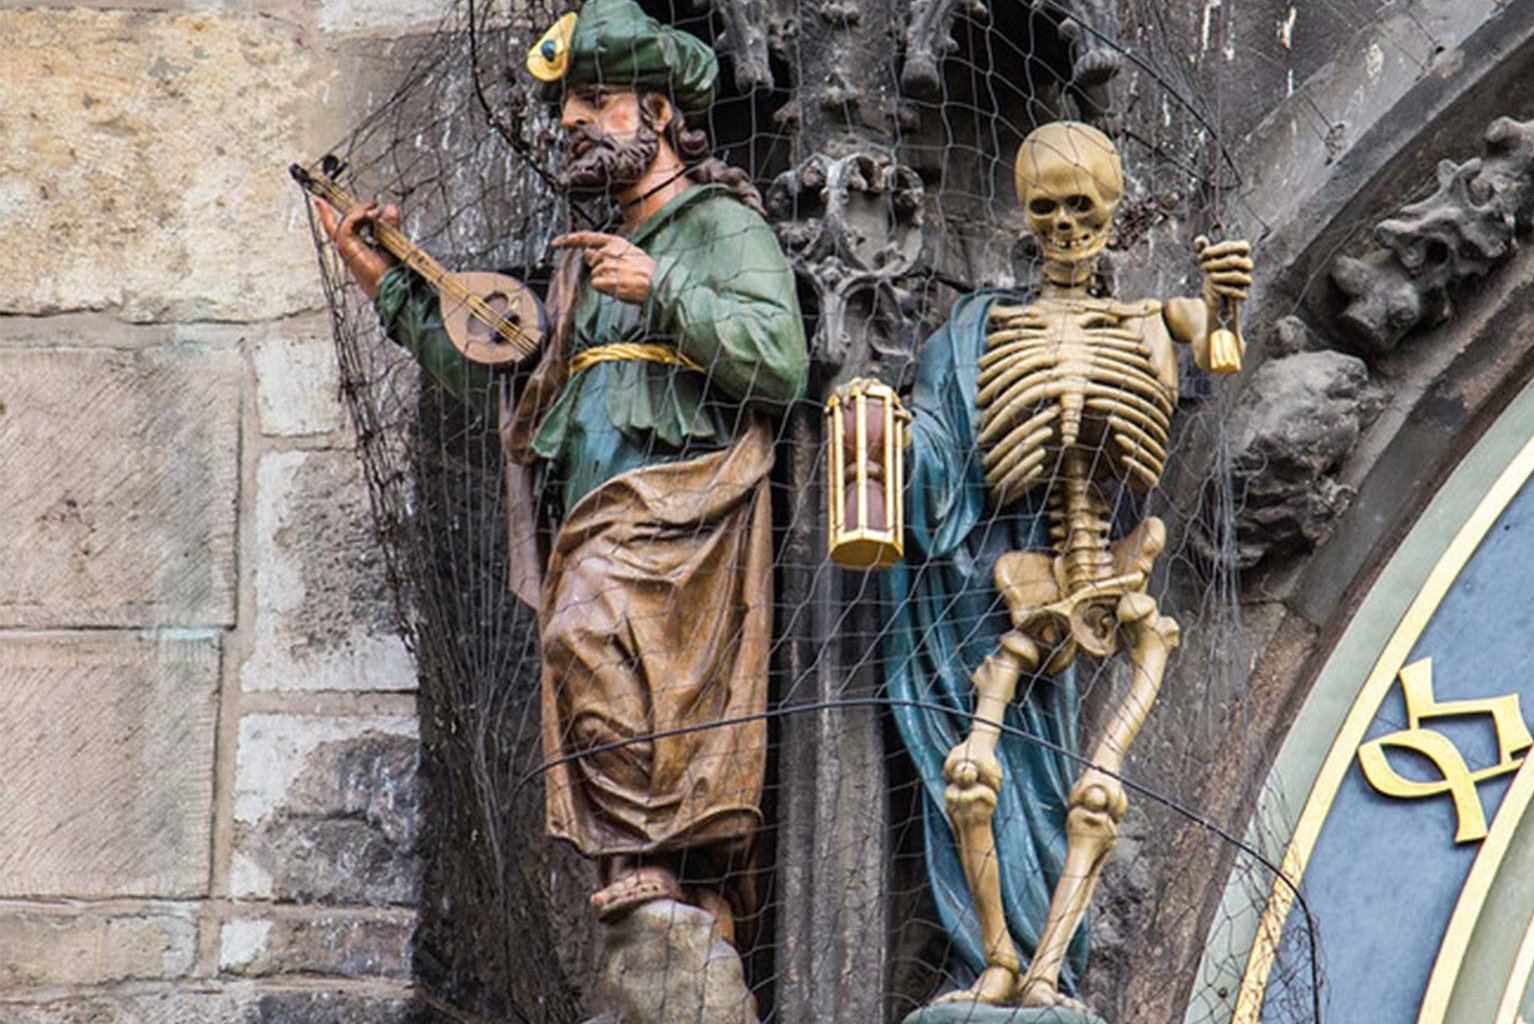 A figure of Death (represented by a skeleton) tolling the bell; a Turkish man shaking his head